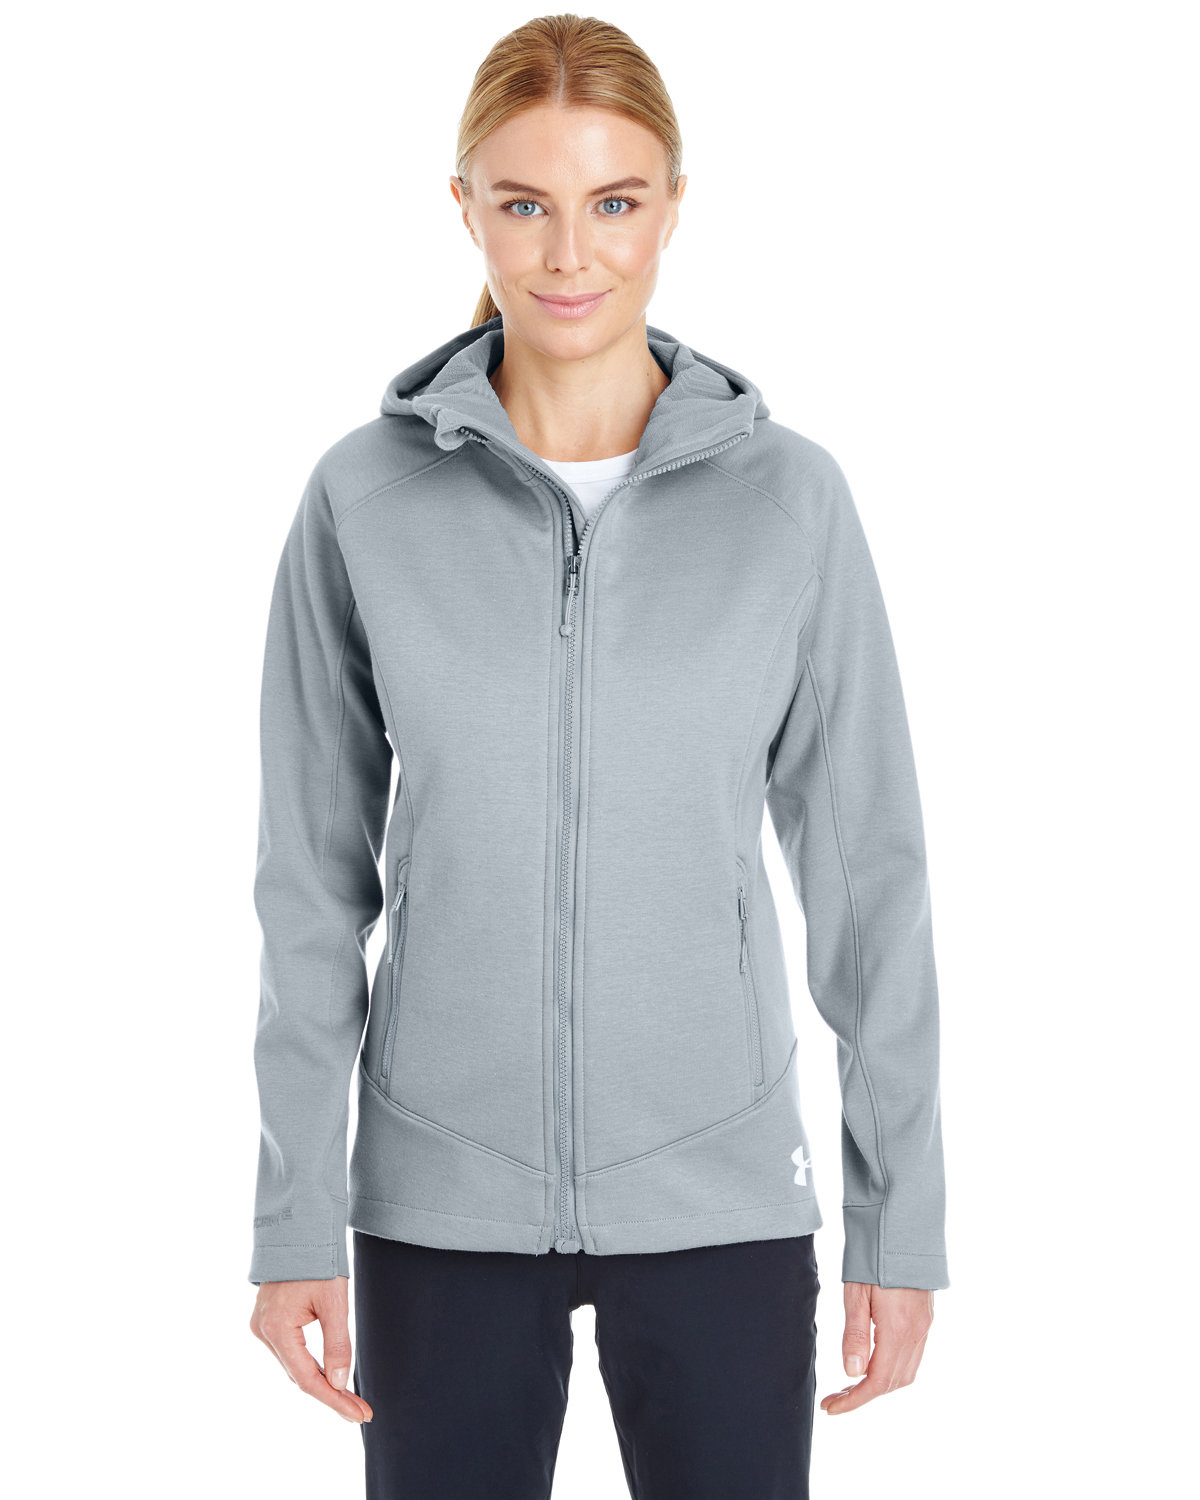 Under Armour SuperSale CGI Dobson Soft Shell TRUE GRAY _035 